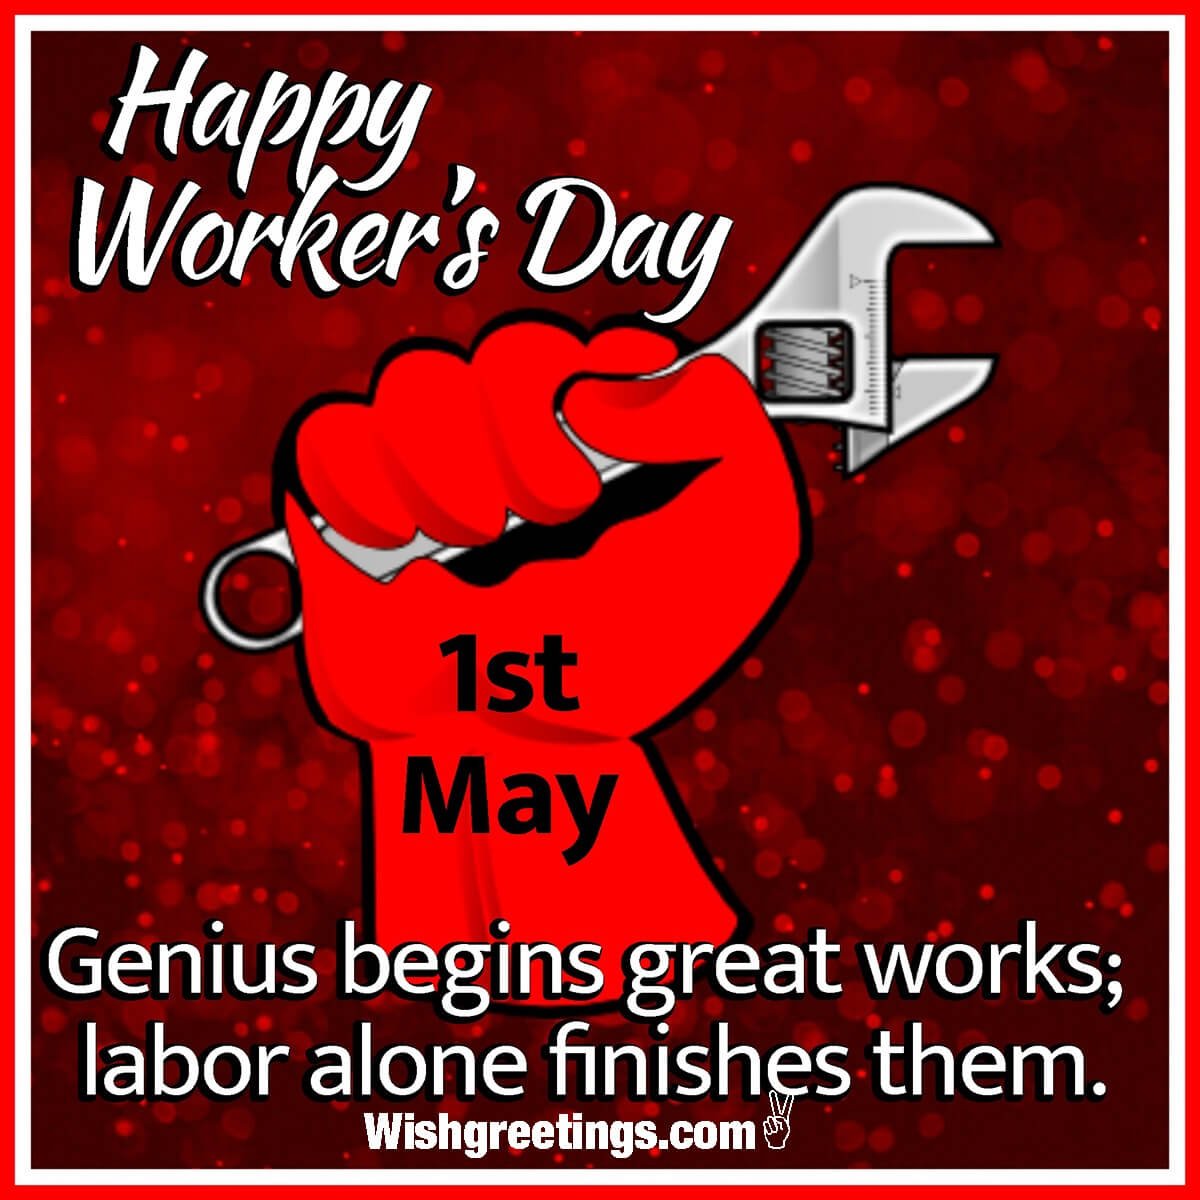 Happy Worker’s Day Image